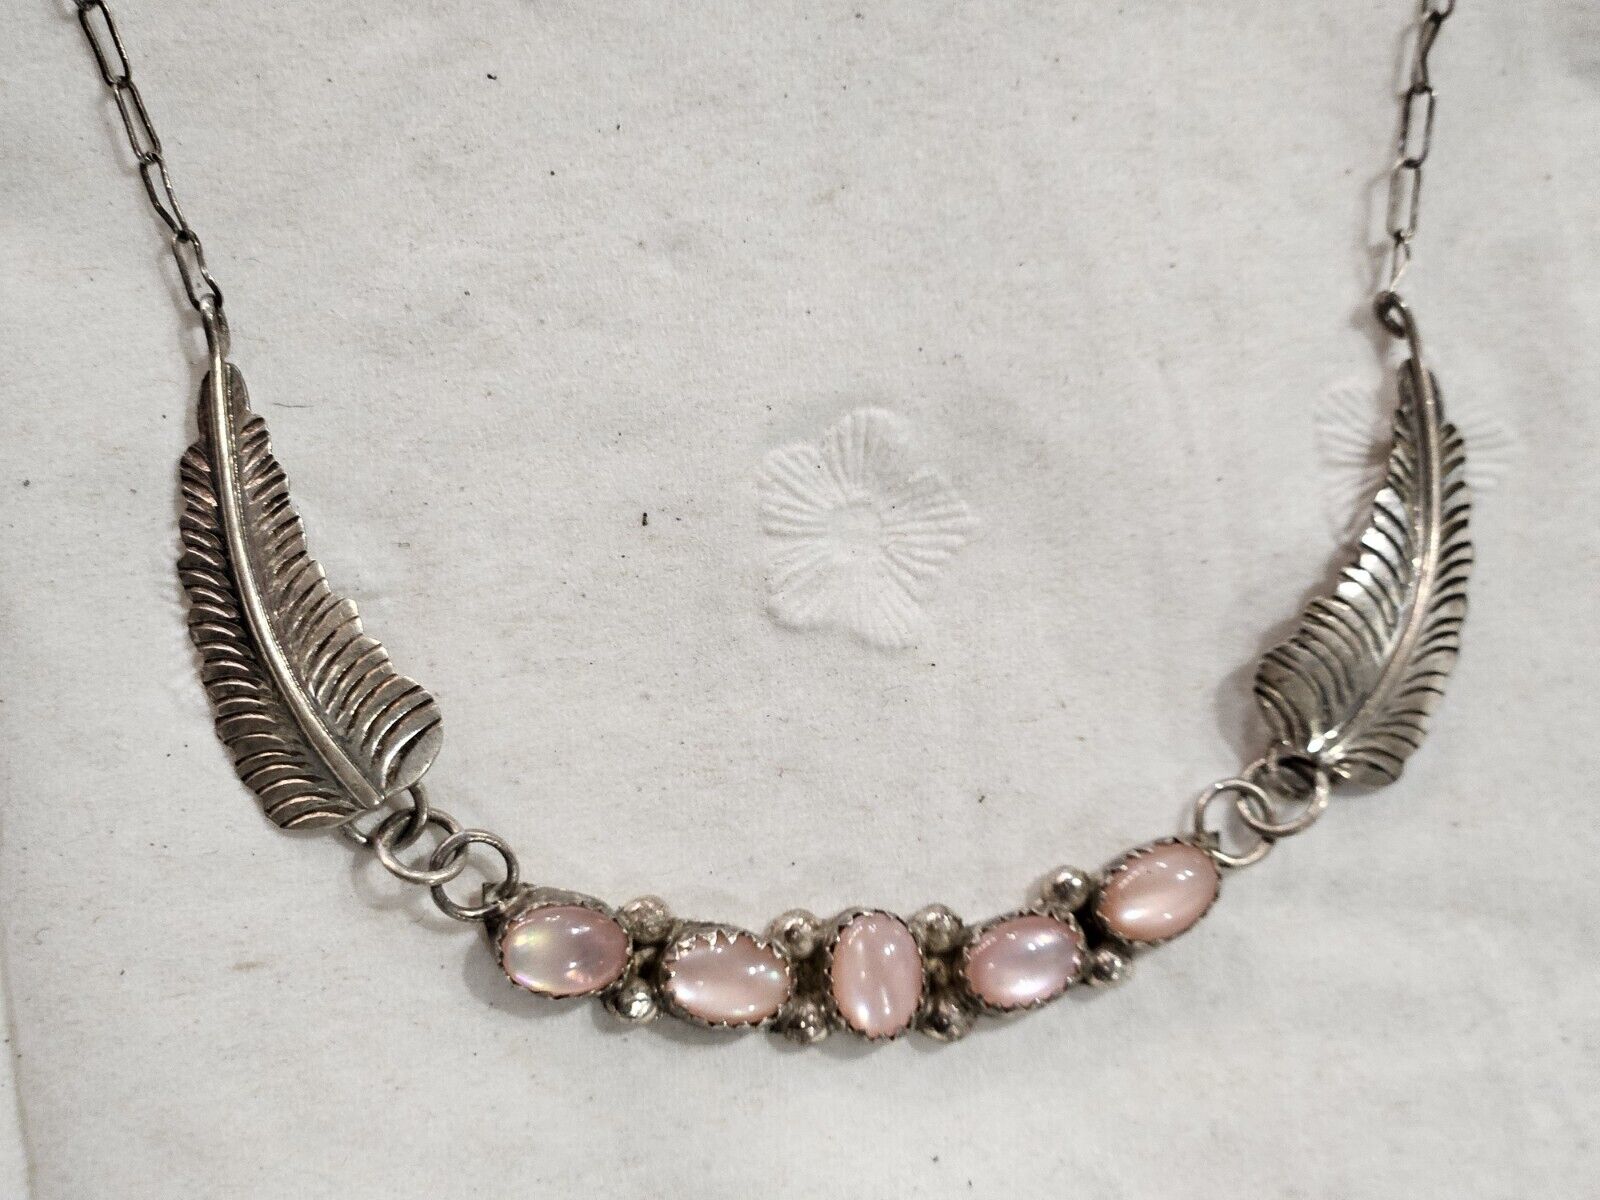 Navajo Indian Artist Signed Wings with Rosequartz Necklace